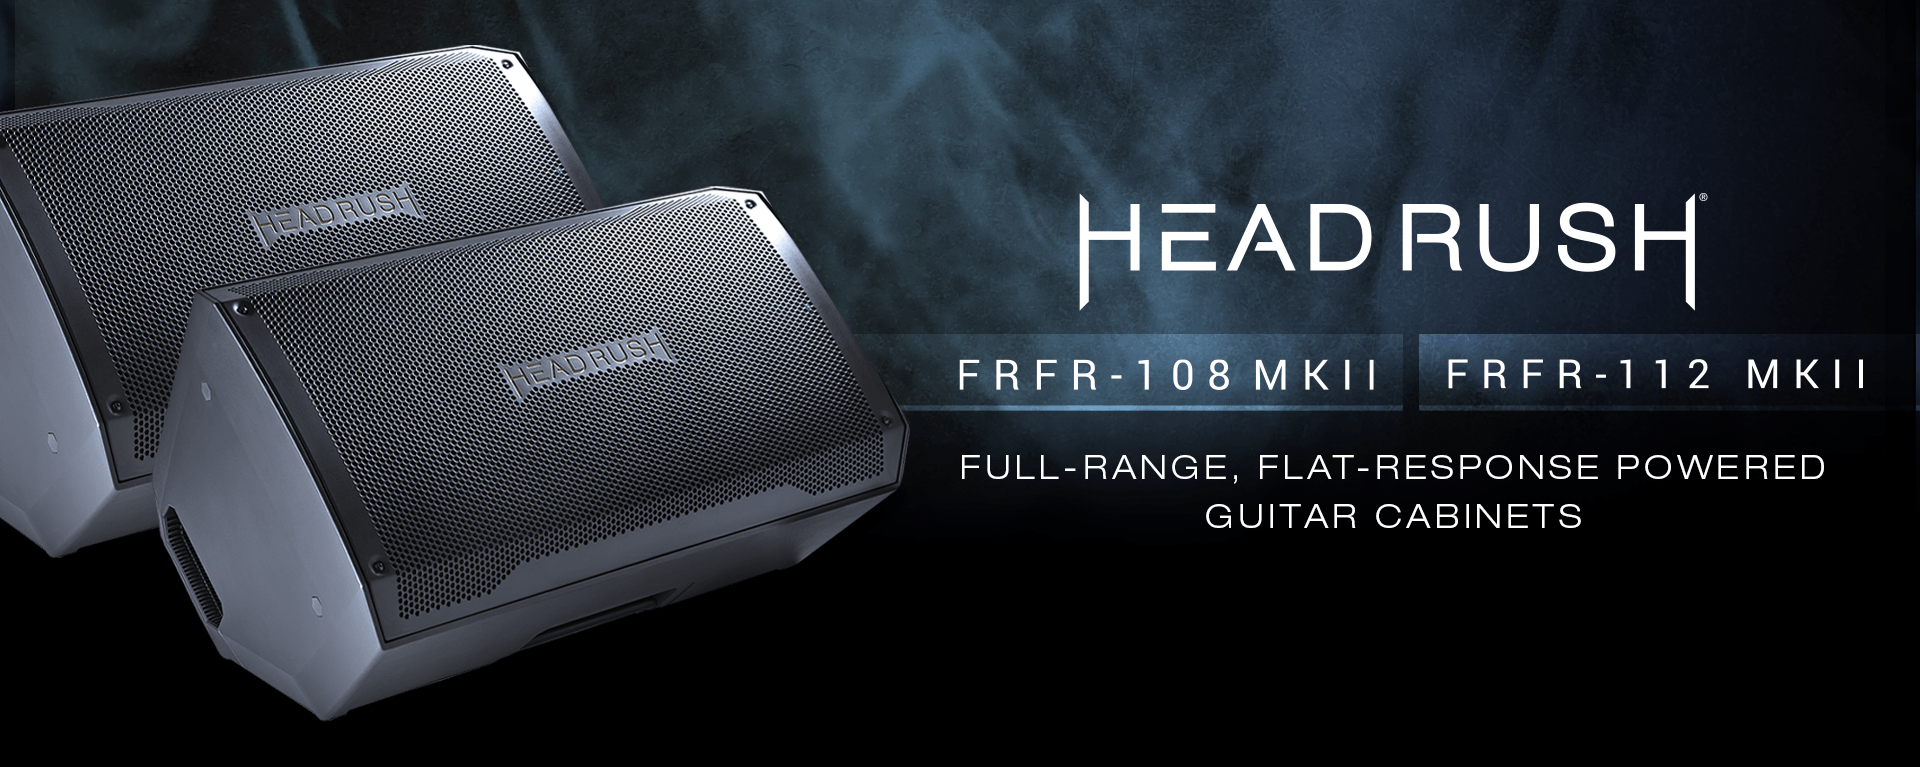 Headrush FRFR-108 MKII & FRFR-112 MKII Now Available